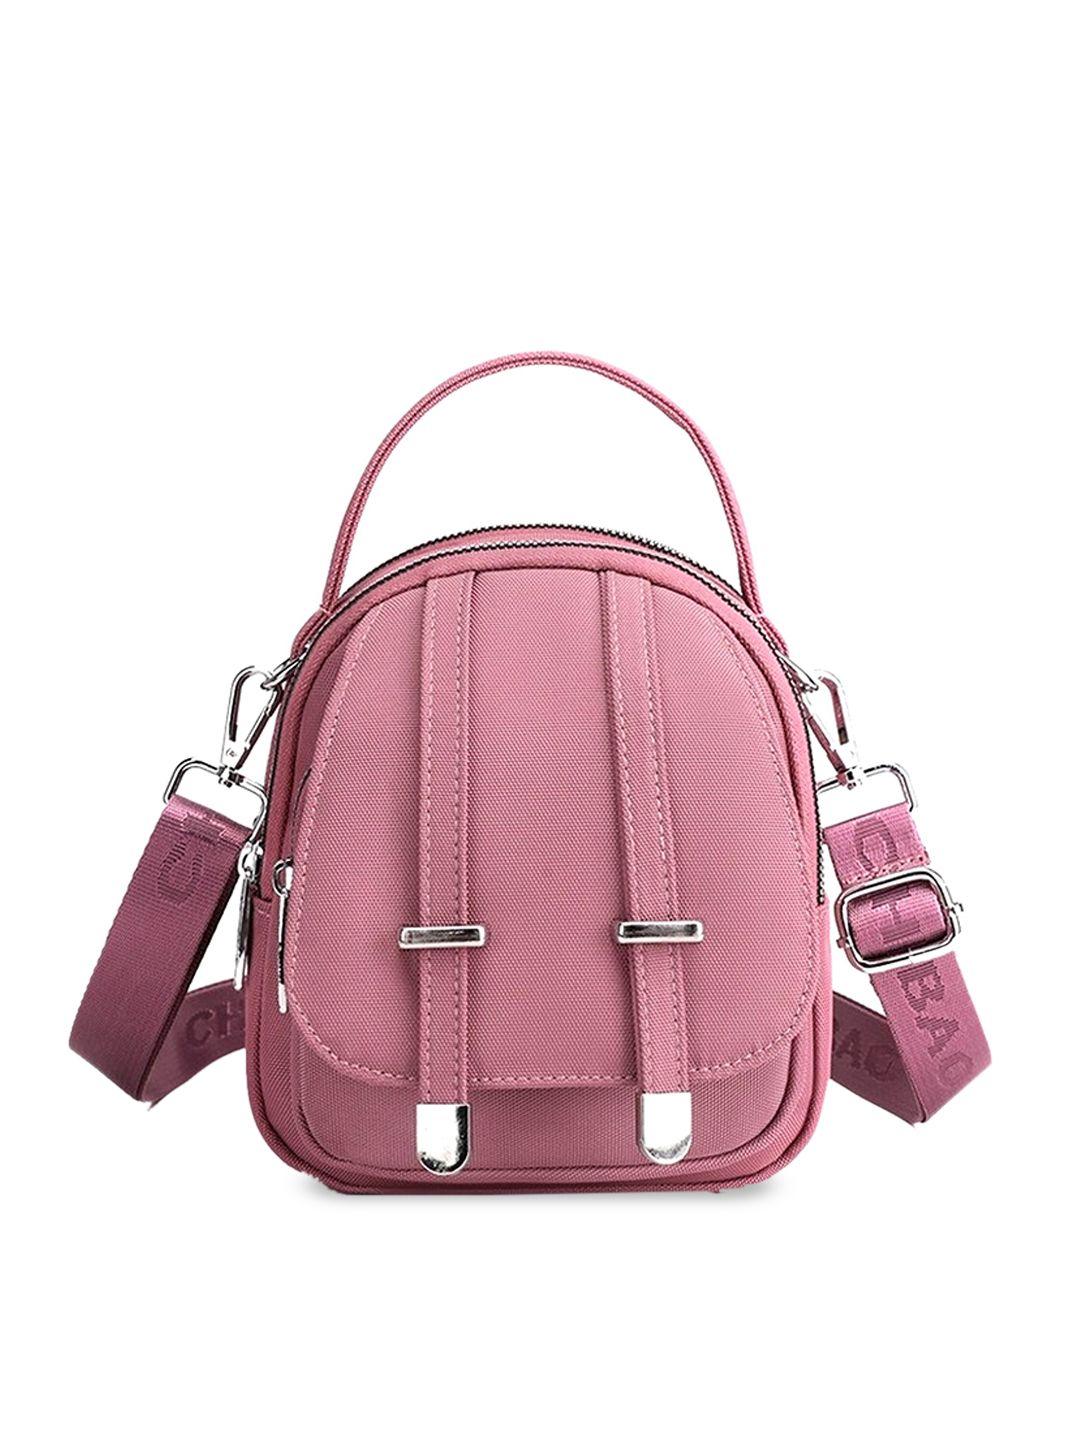 diva dale pink textured structured sling bag with quilted